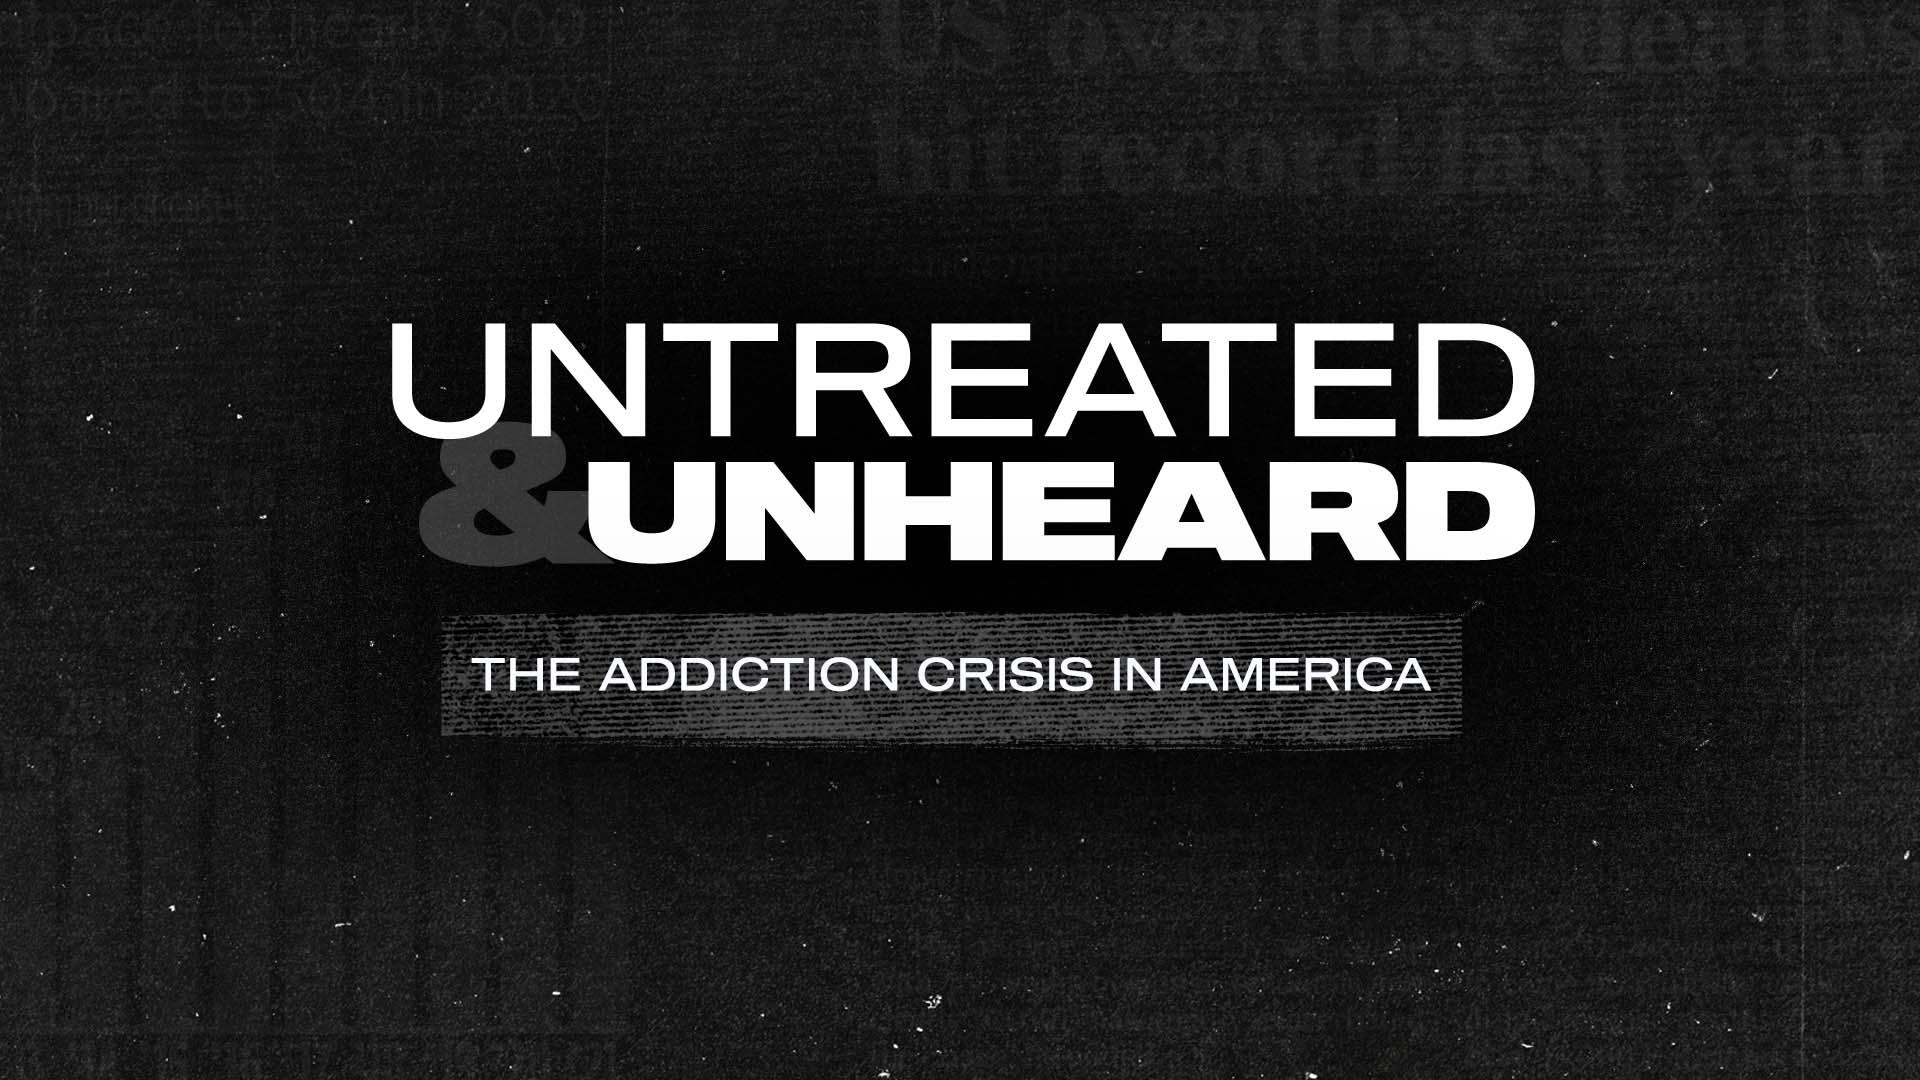 White text against a black background reads "Untreated and Unheard: The Addiction Crisis in America"